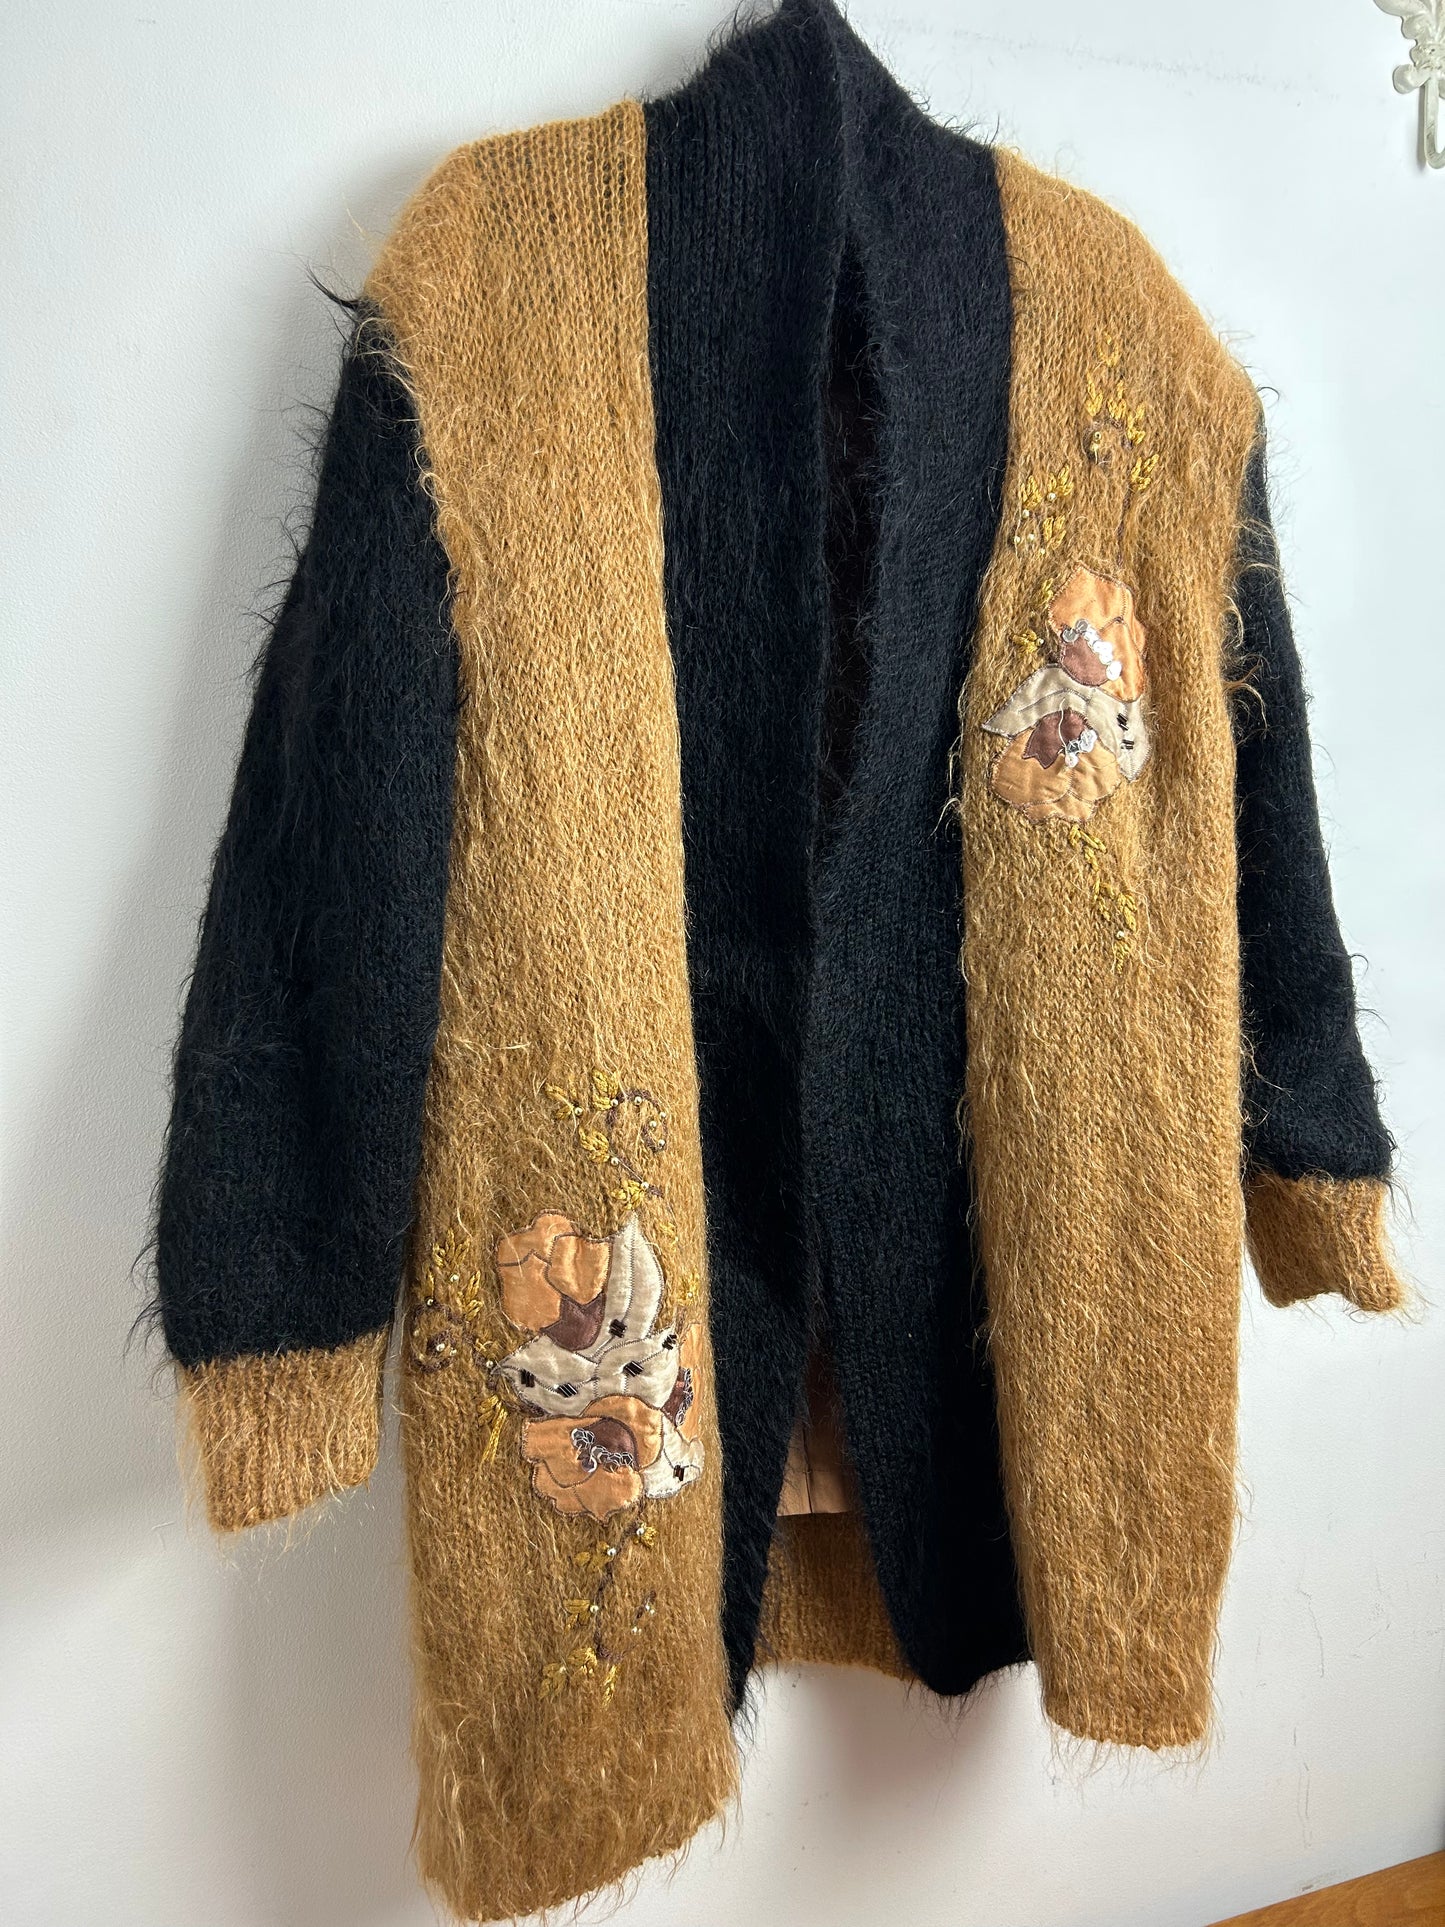 Vintage 1980s Oversize Slouchy Style Camel Brown Black & Cream Floral Applique Mohair Open Sleeve Cardigan